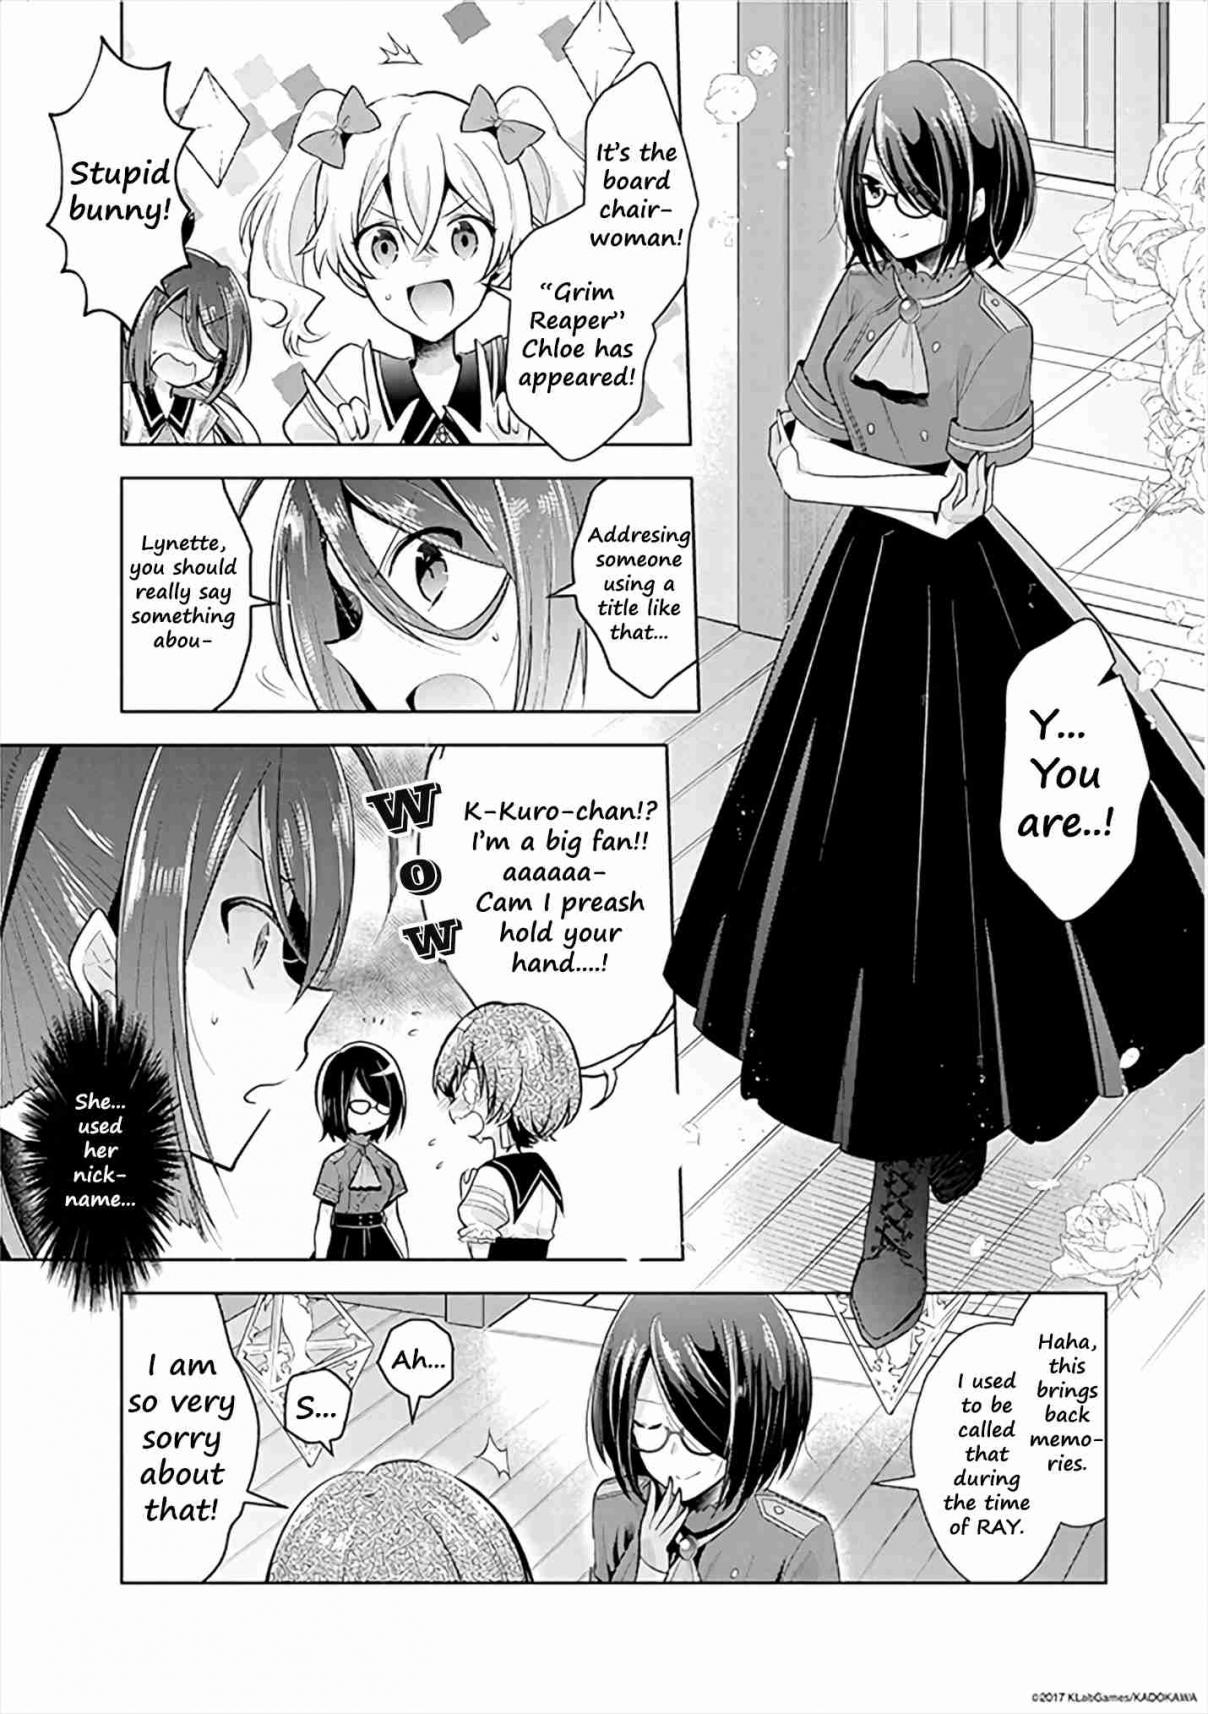 Lapis Re:LiGHTs Web Comic (Our Prelude) Vol. 1 Ch. 2 Our Prelude (LiGHTs)